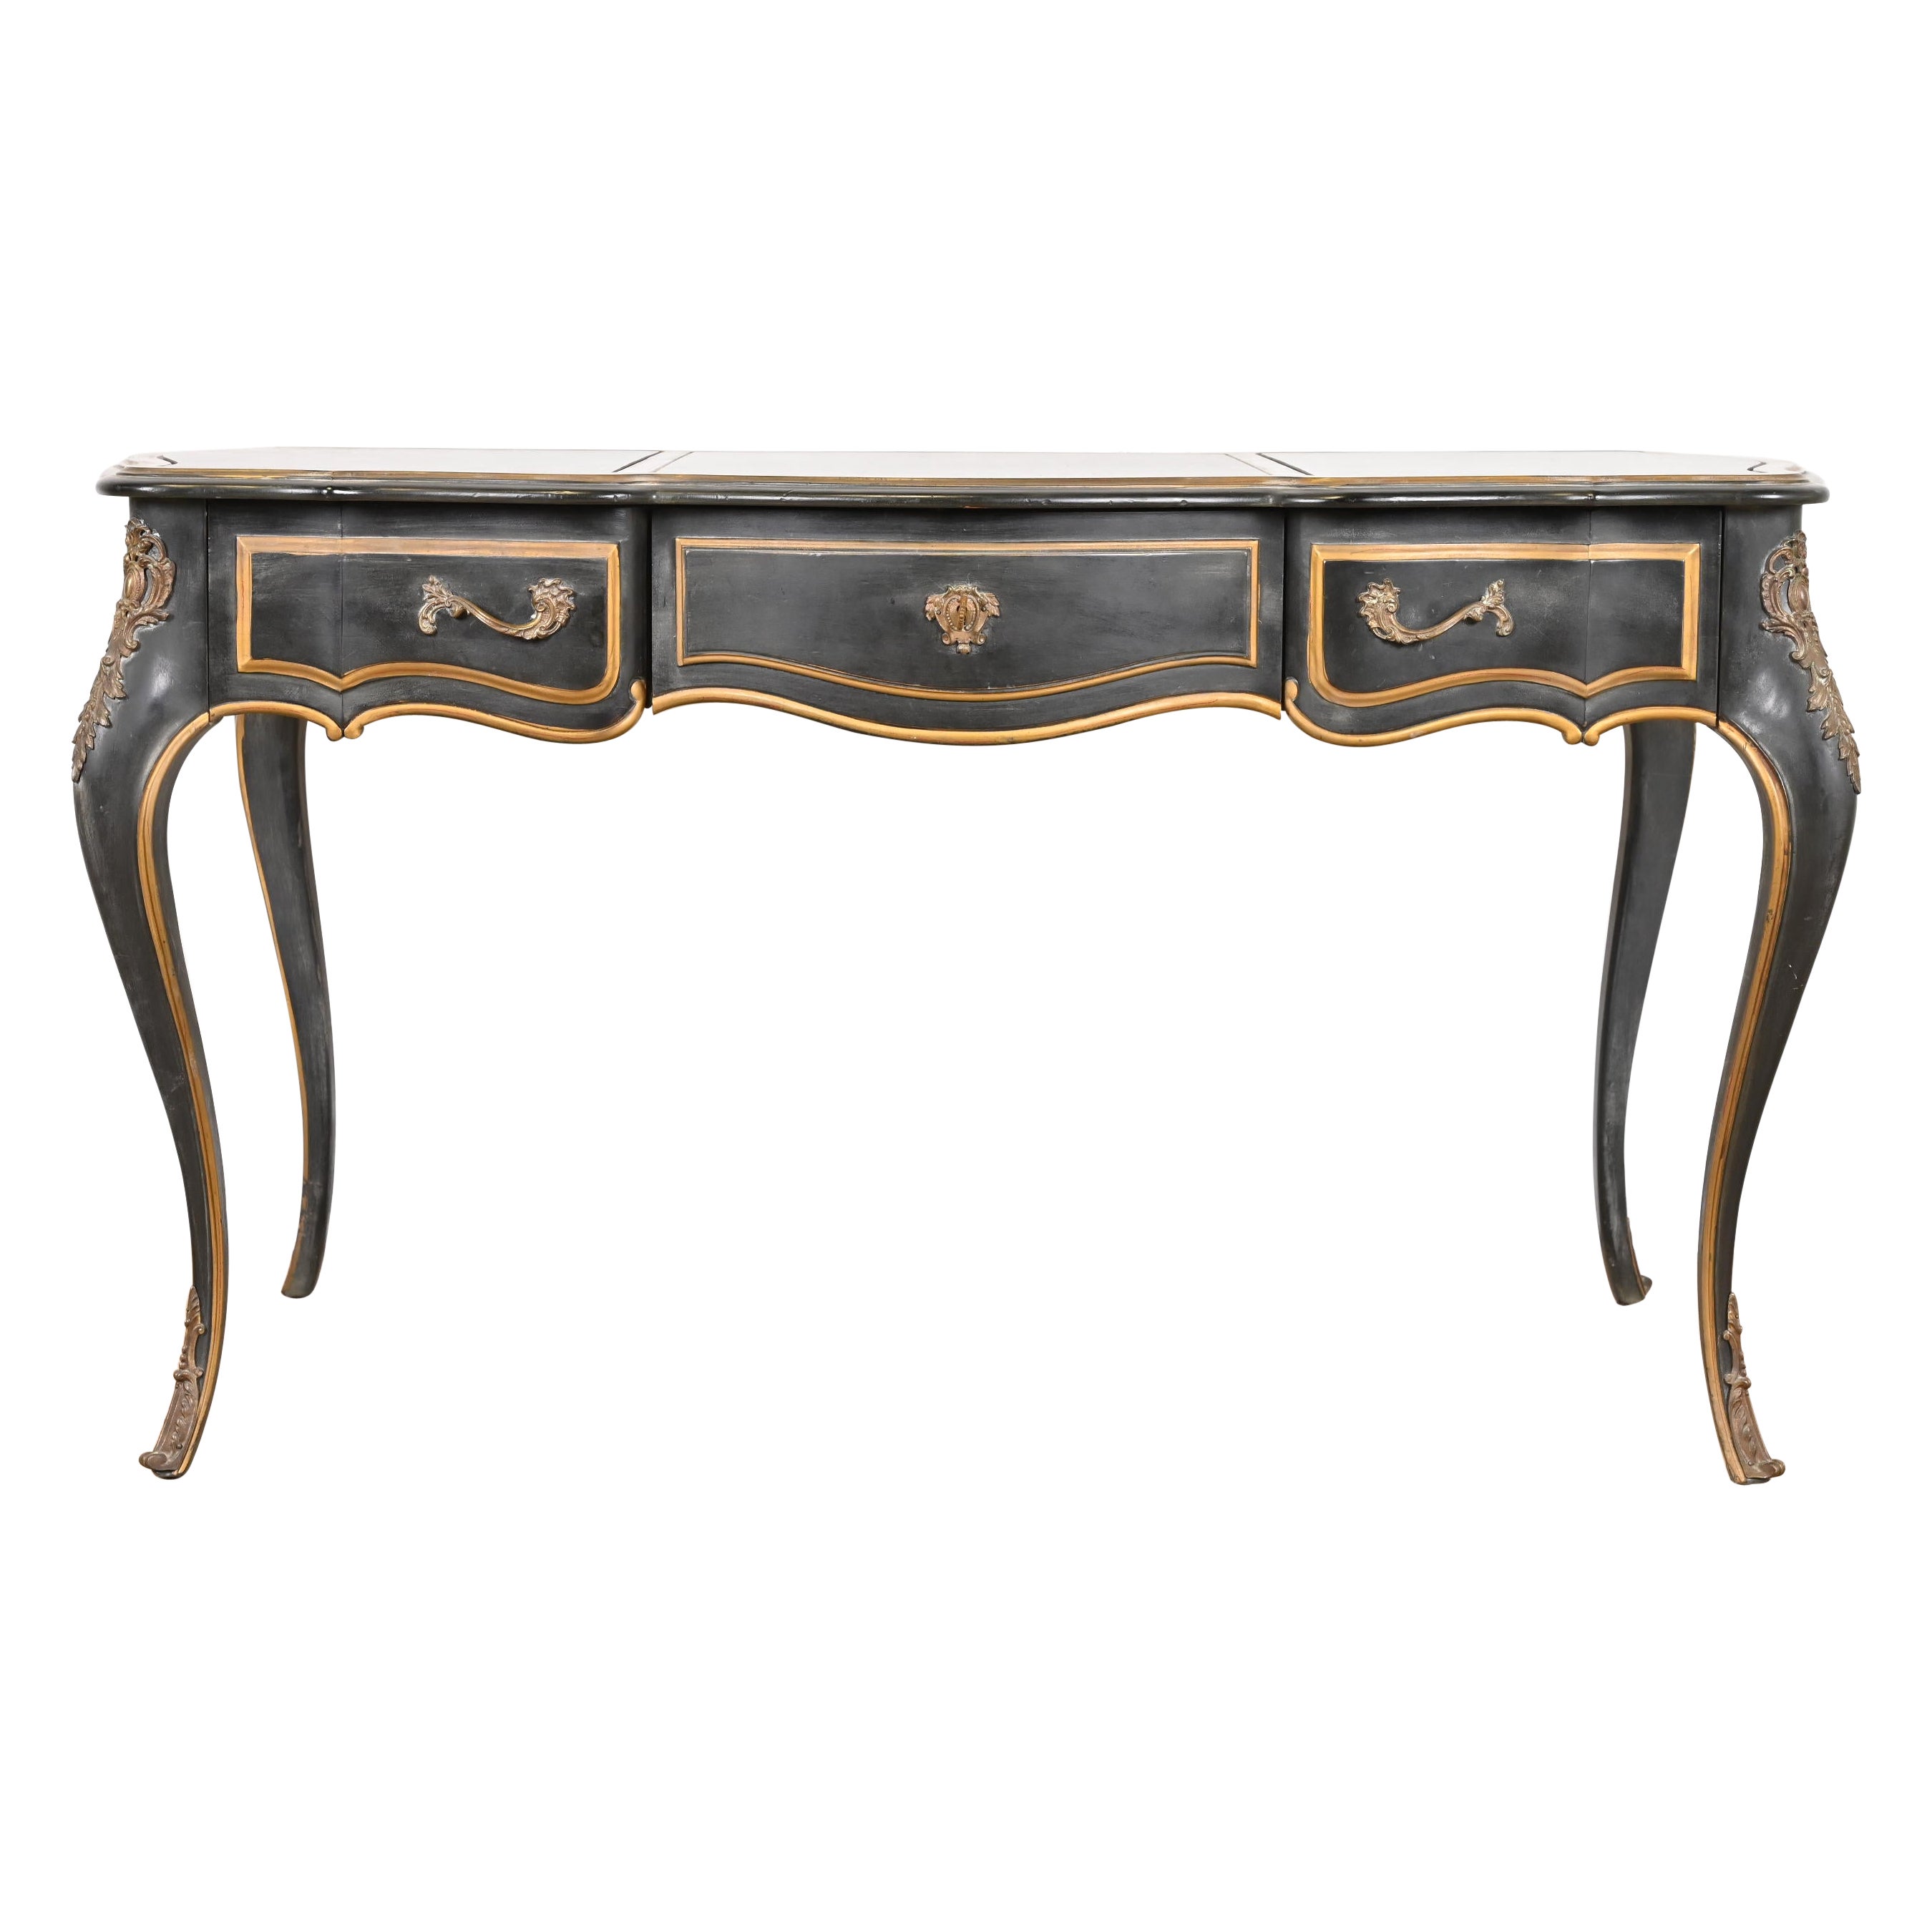 French Louis XV Bureau Plat Desk with Ormolu and Faux Marble Top by Drexel